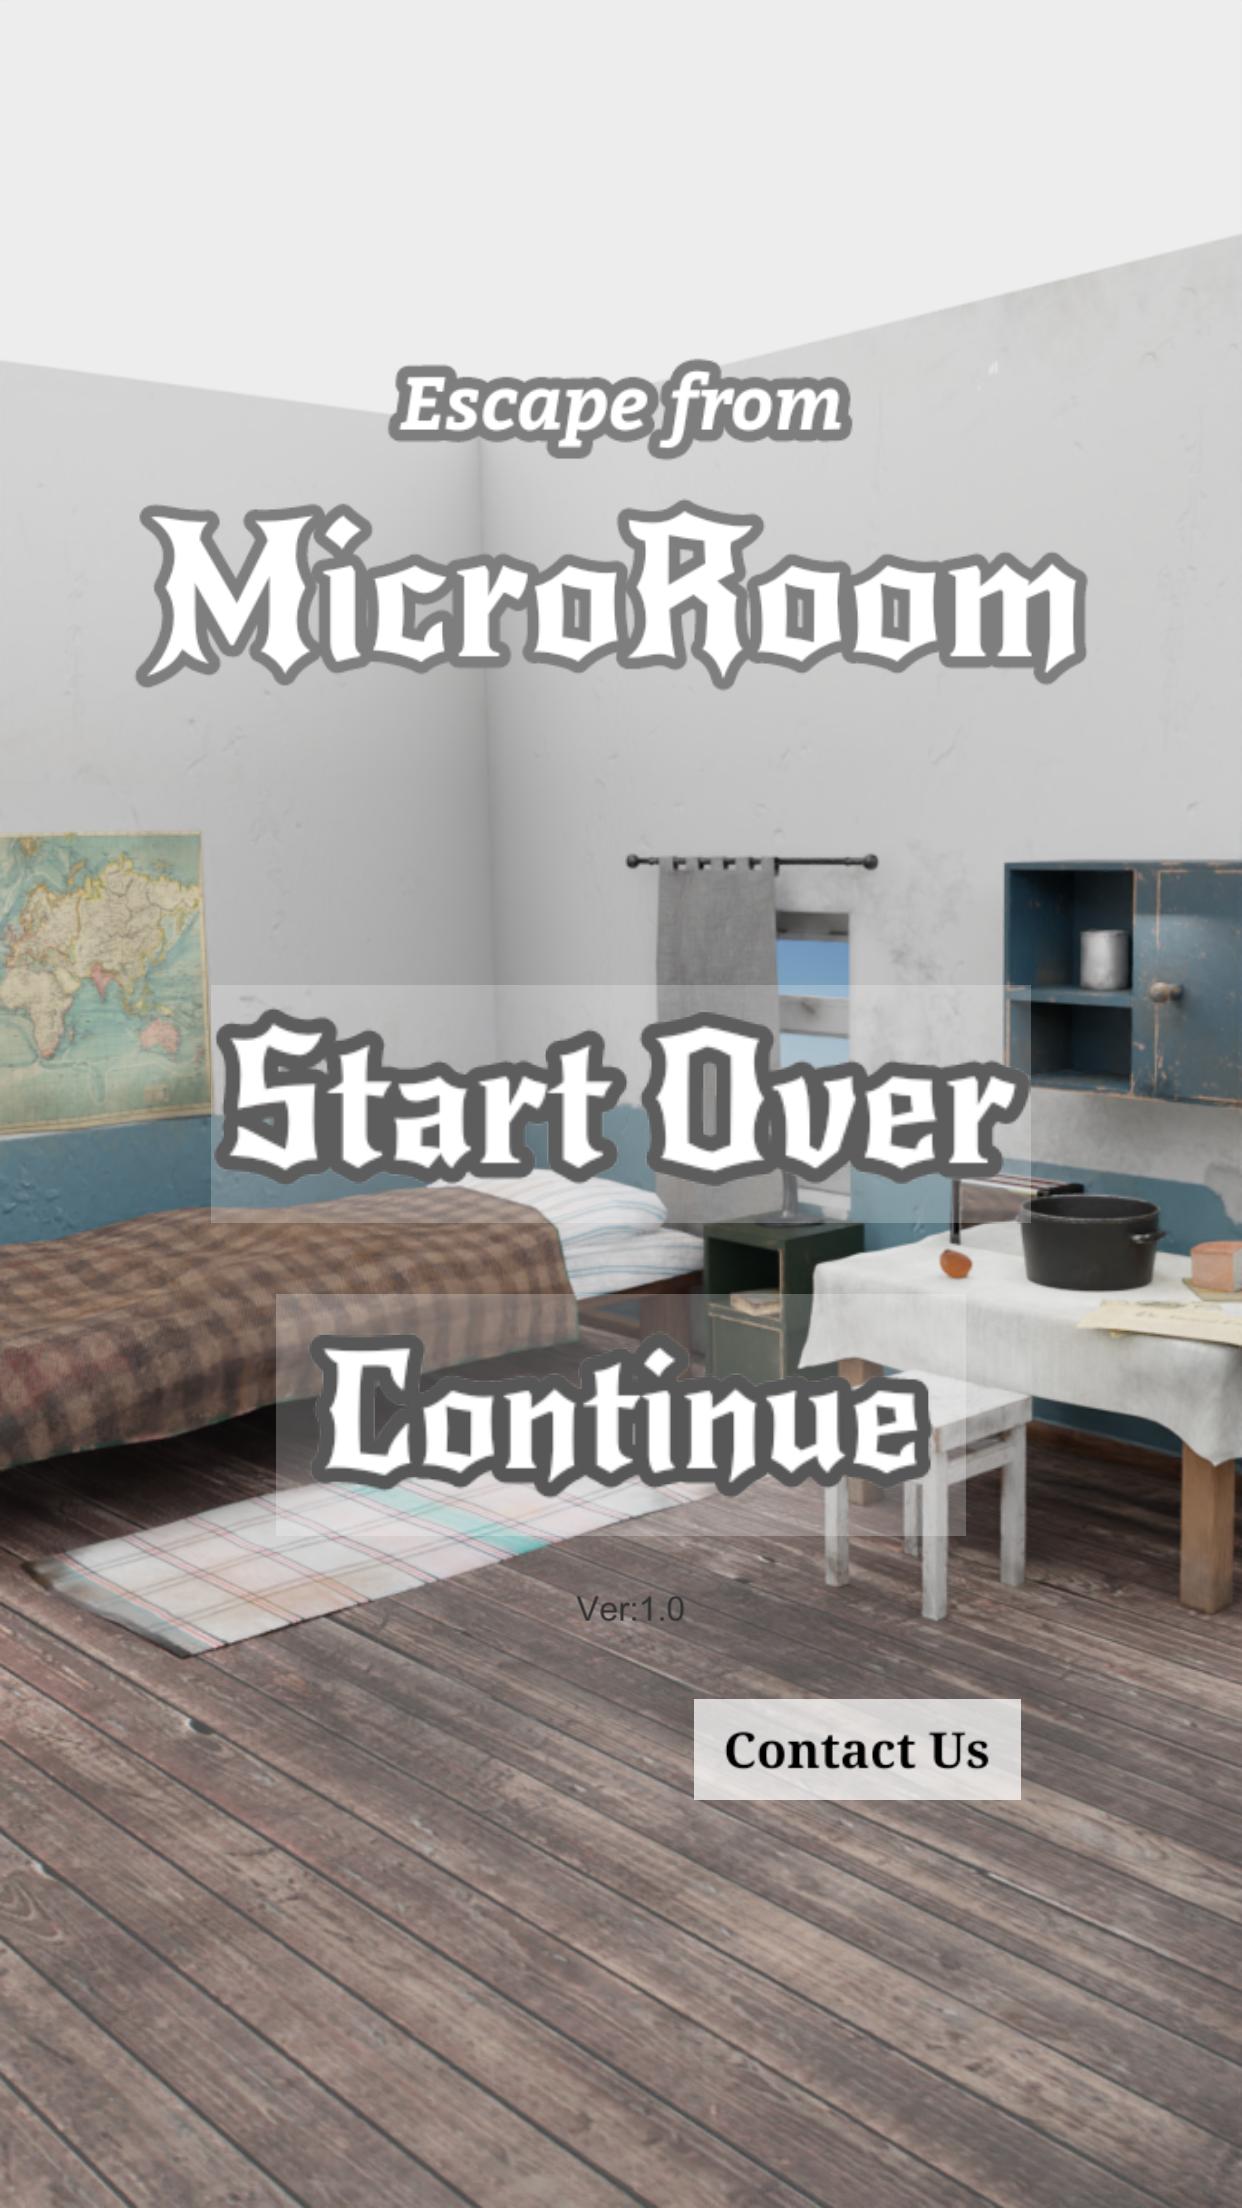 Escape from micro room 1.8 Screenshot 1